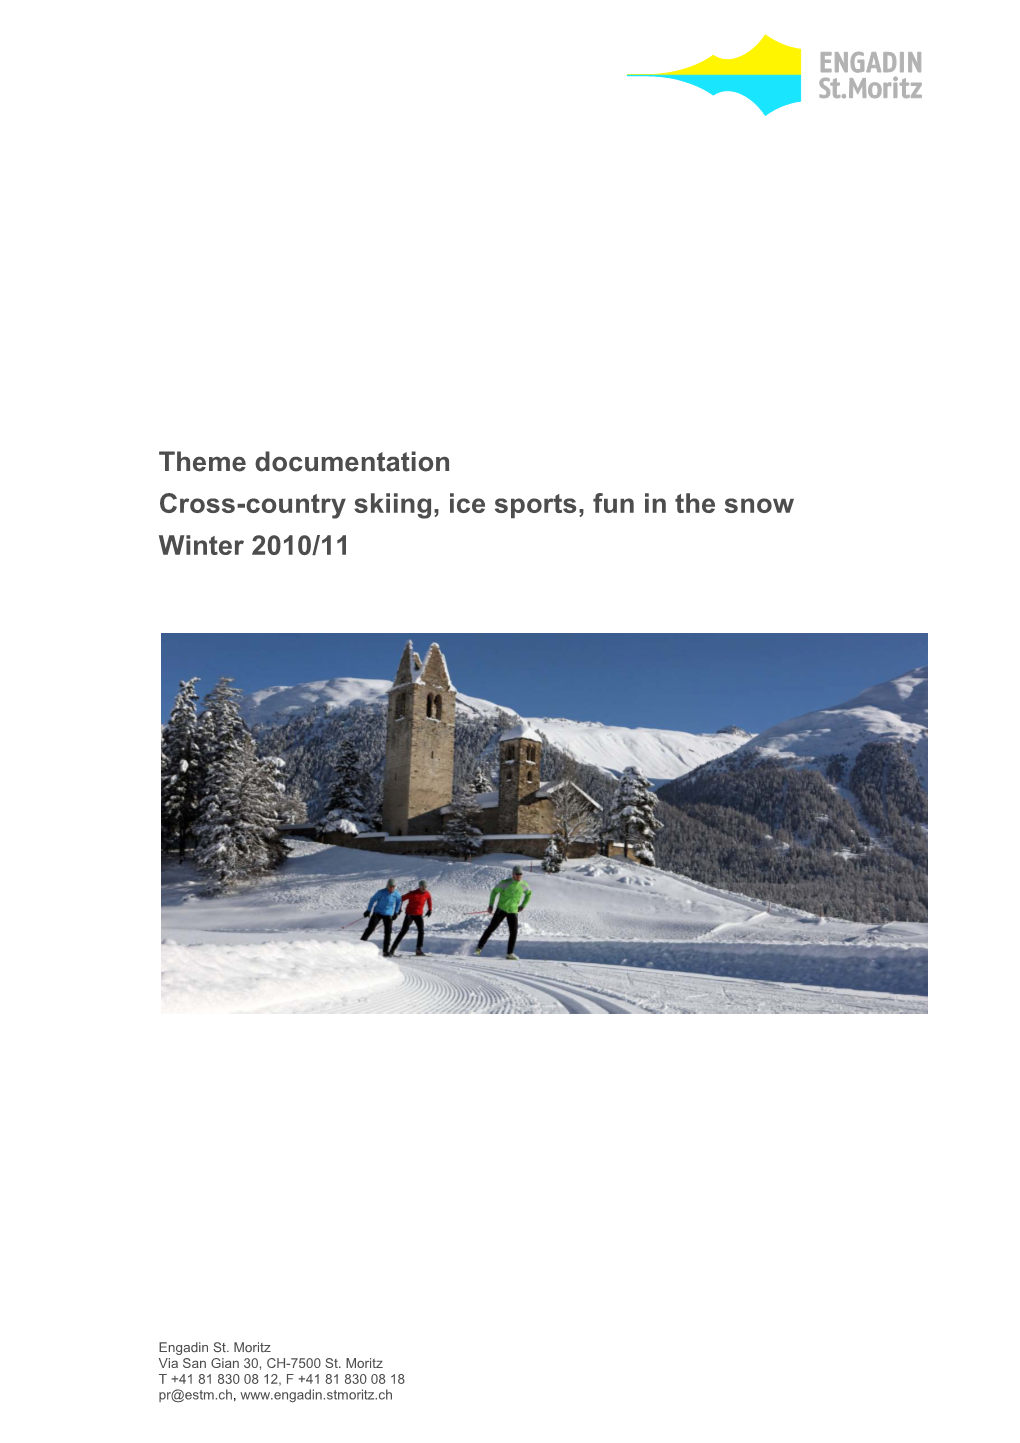 Theme Documentation Cross-Country Skiing, Ice Sports, Fun in the Snow Winter 2010/11